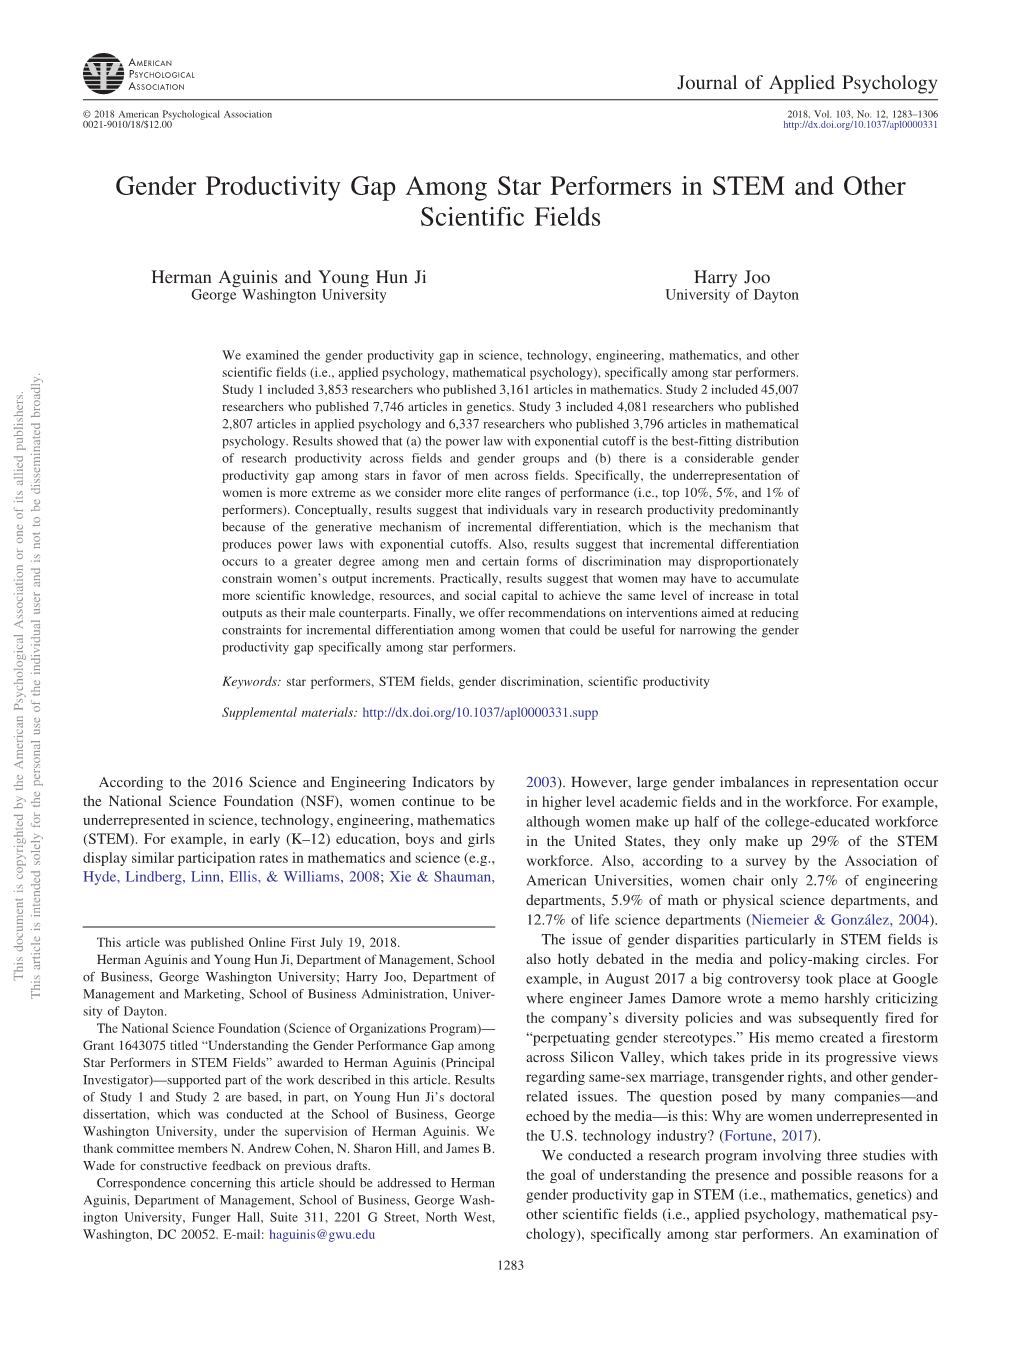 Gender Productivity Gap Among Star Performers in STEM and Other Scientific Fields